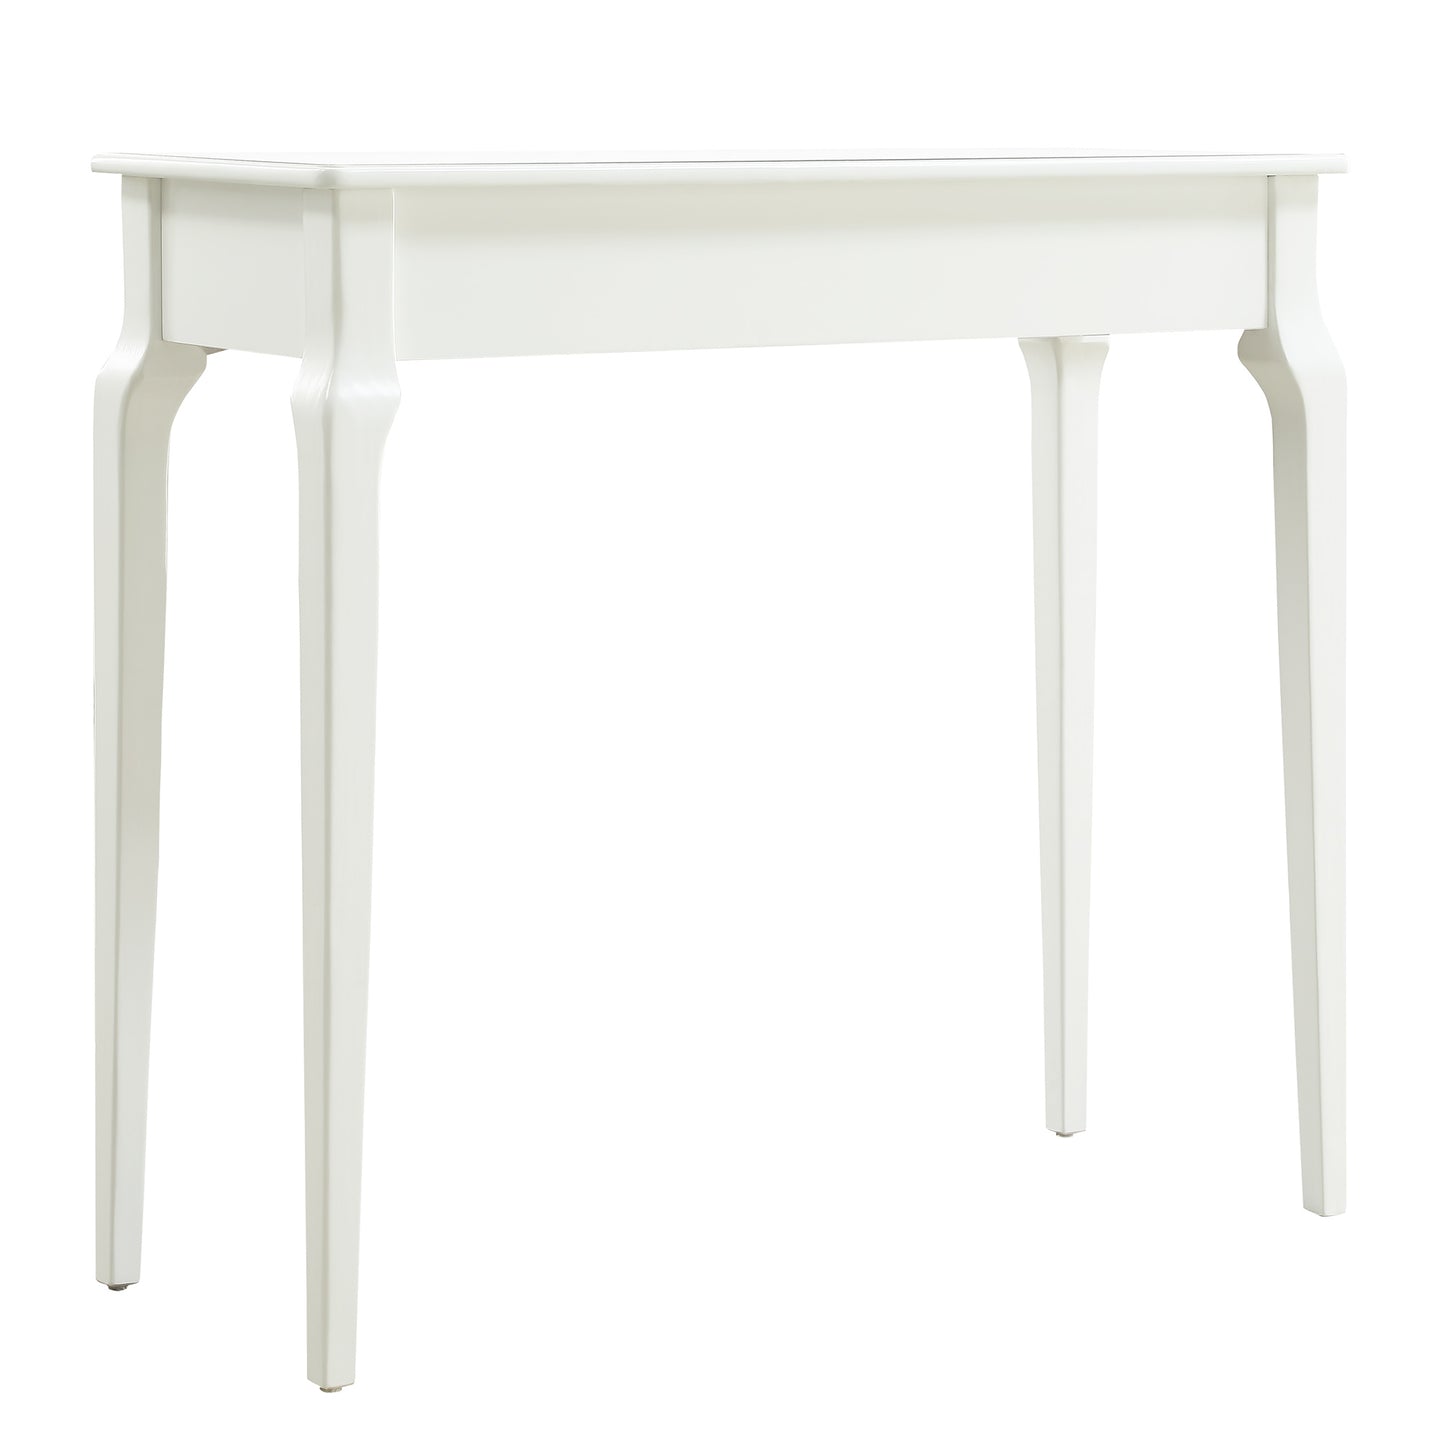 1-Drawer Wood Accent Console Sofa Table - White